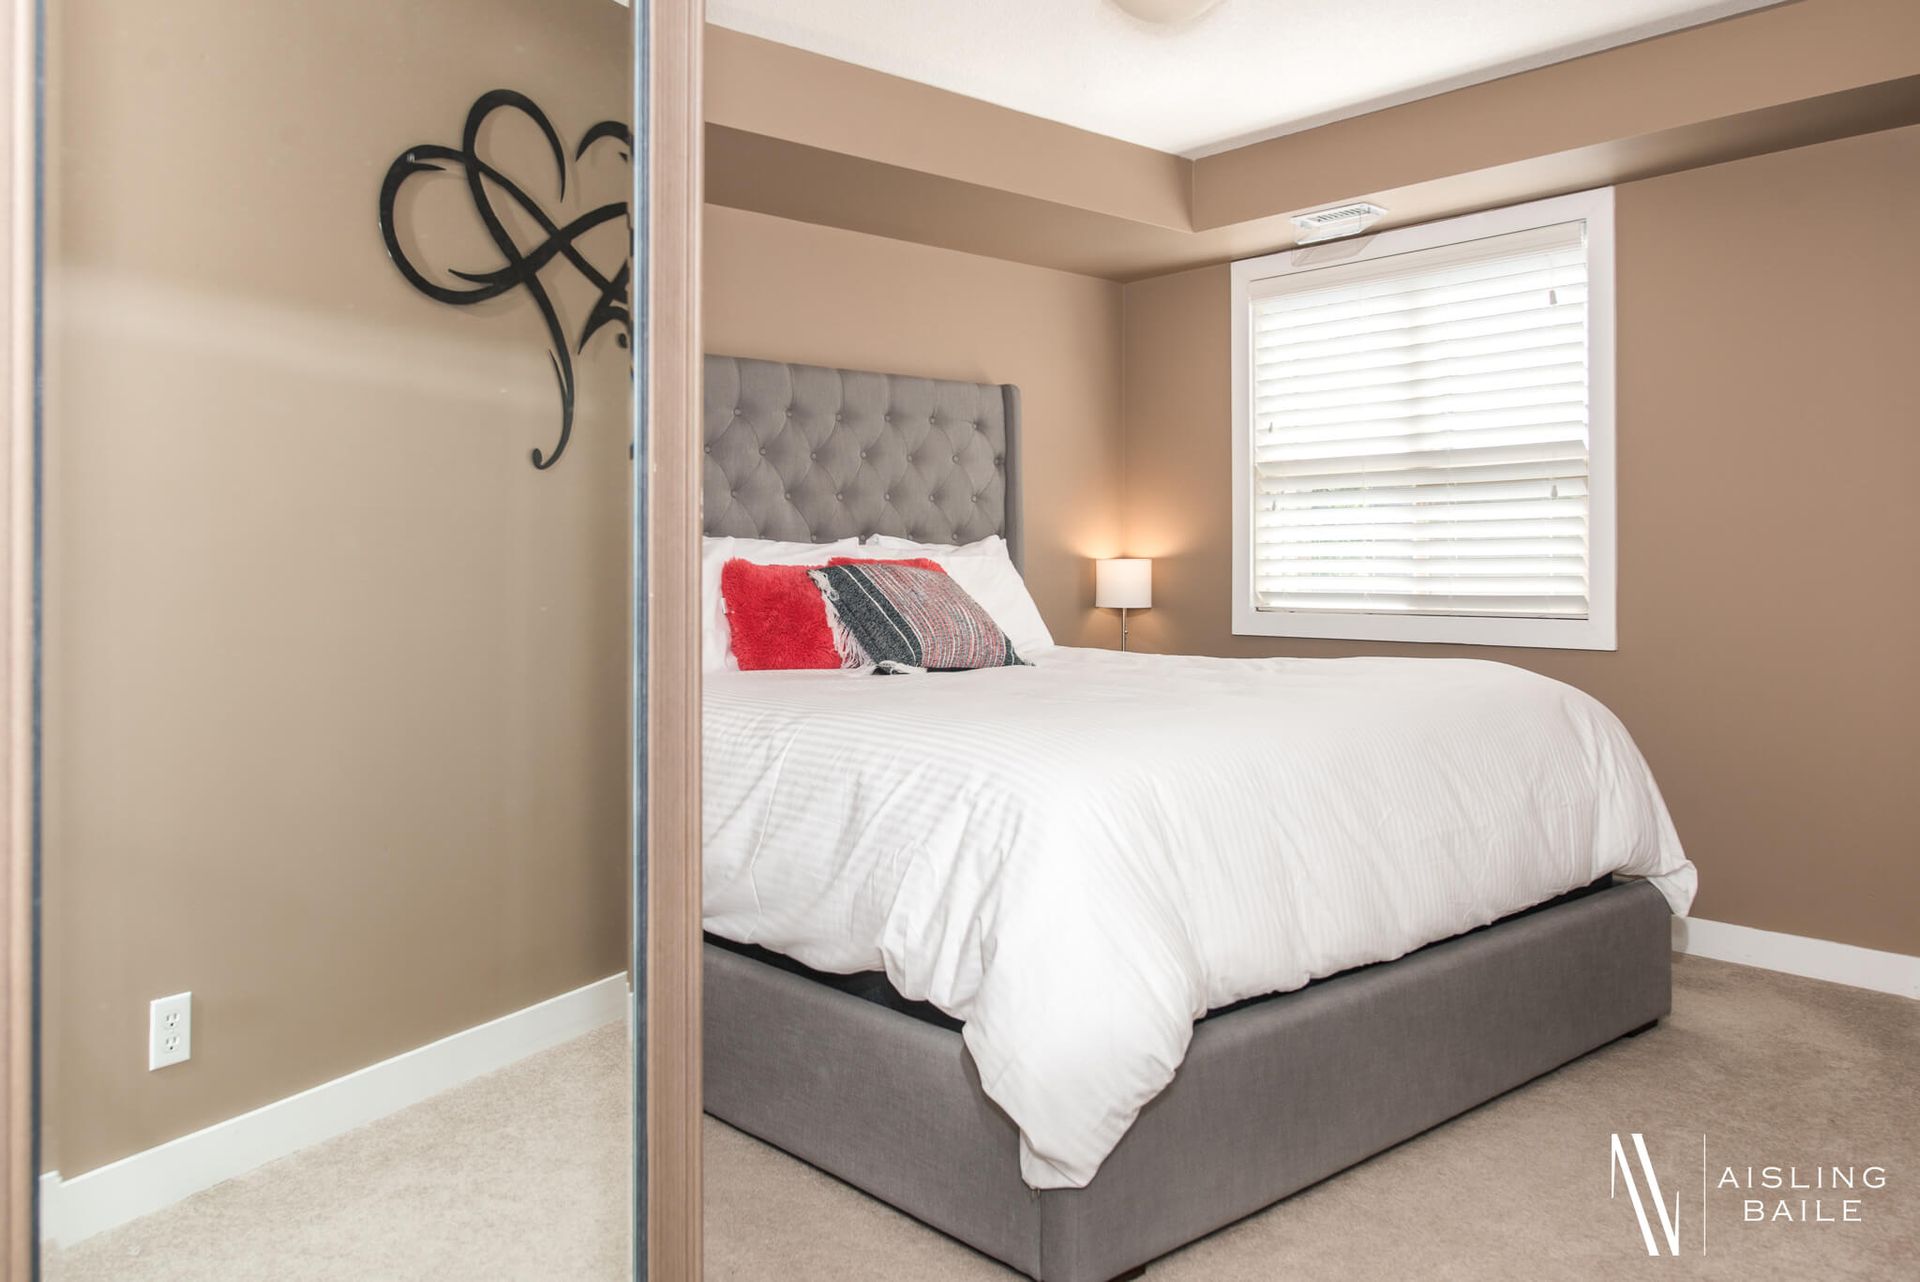 Primary bedroom with a king bed at the Stylish condo of Lake Windermere Pointe in Invermere, a BC Vacation Rental hosted by Aisling Baile Property Management.